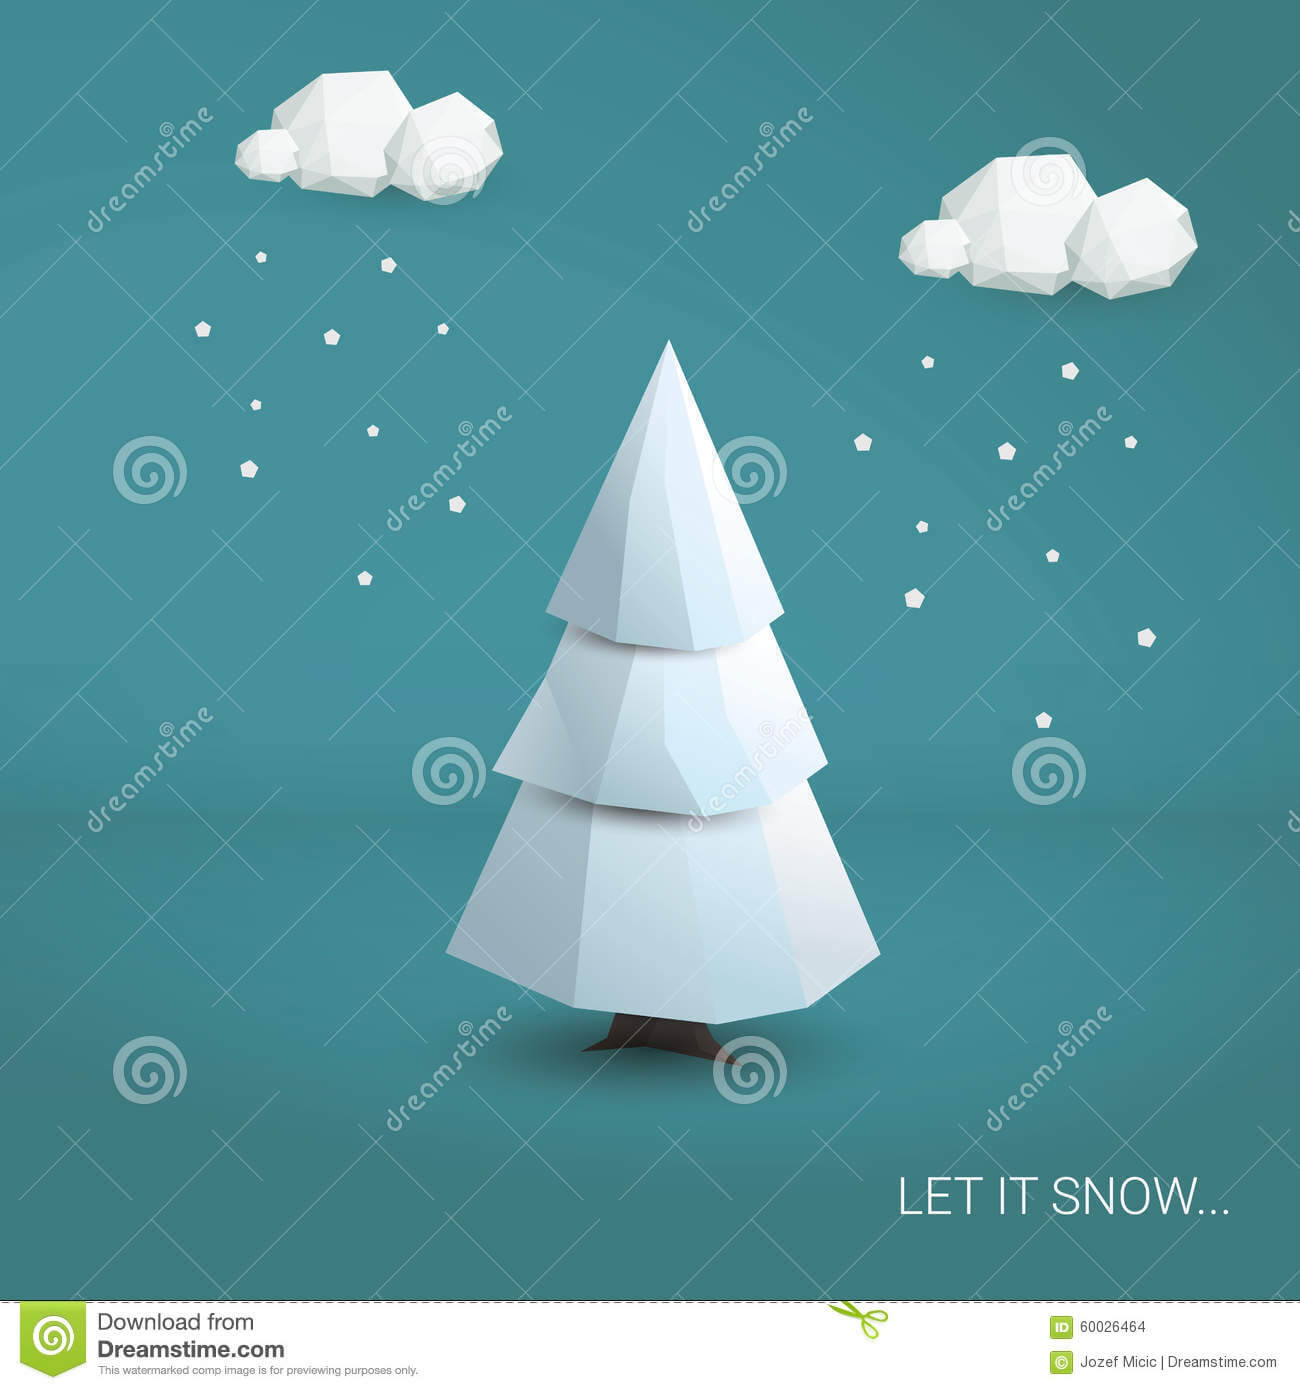 3D Low Poly Christmas Tree Card Template Stock Illustration Regarding 3D Christmas Tree Card Template